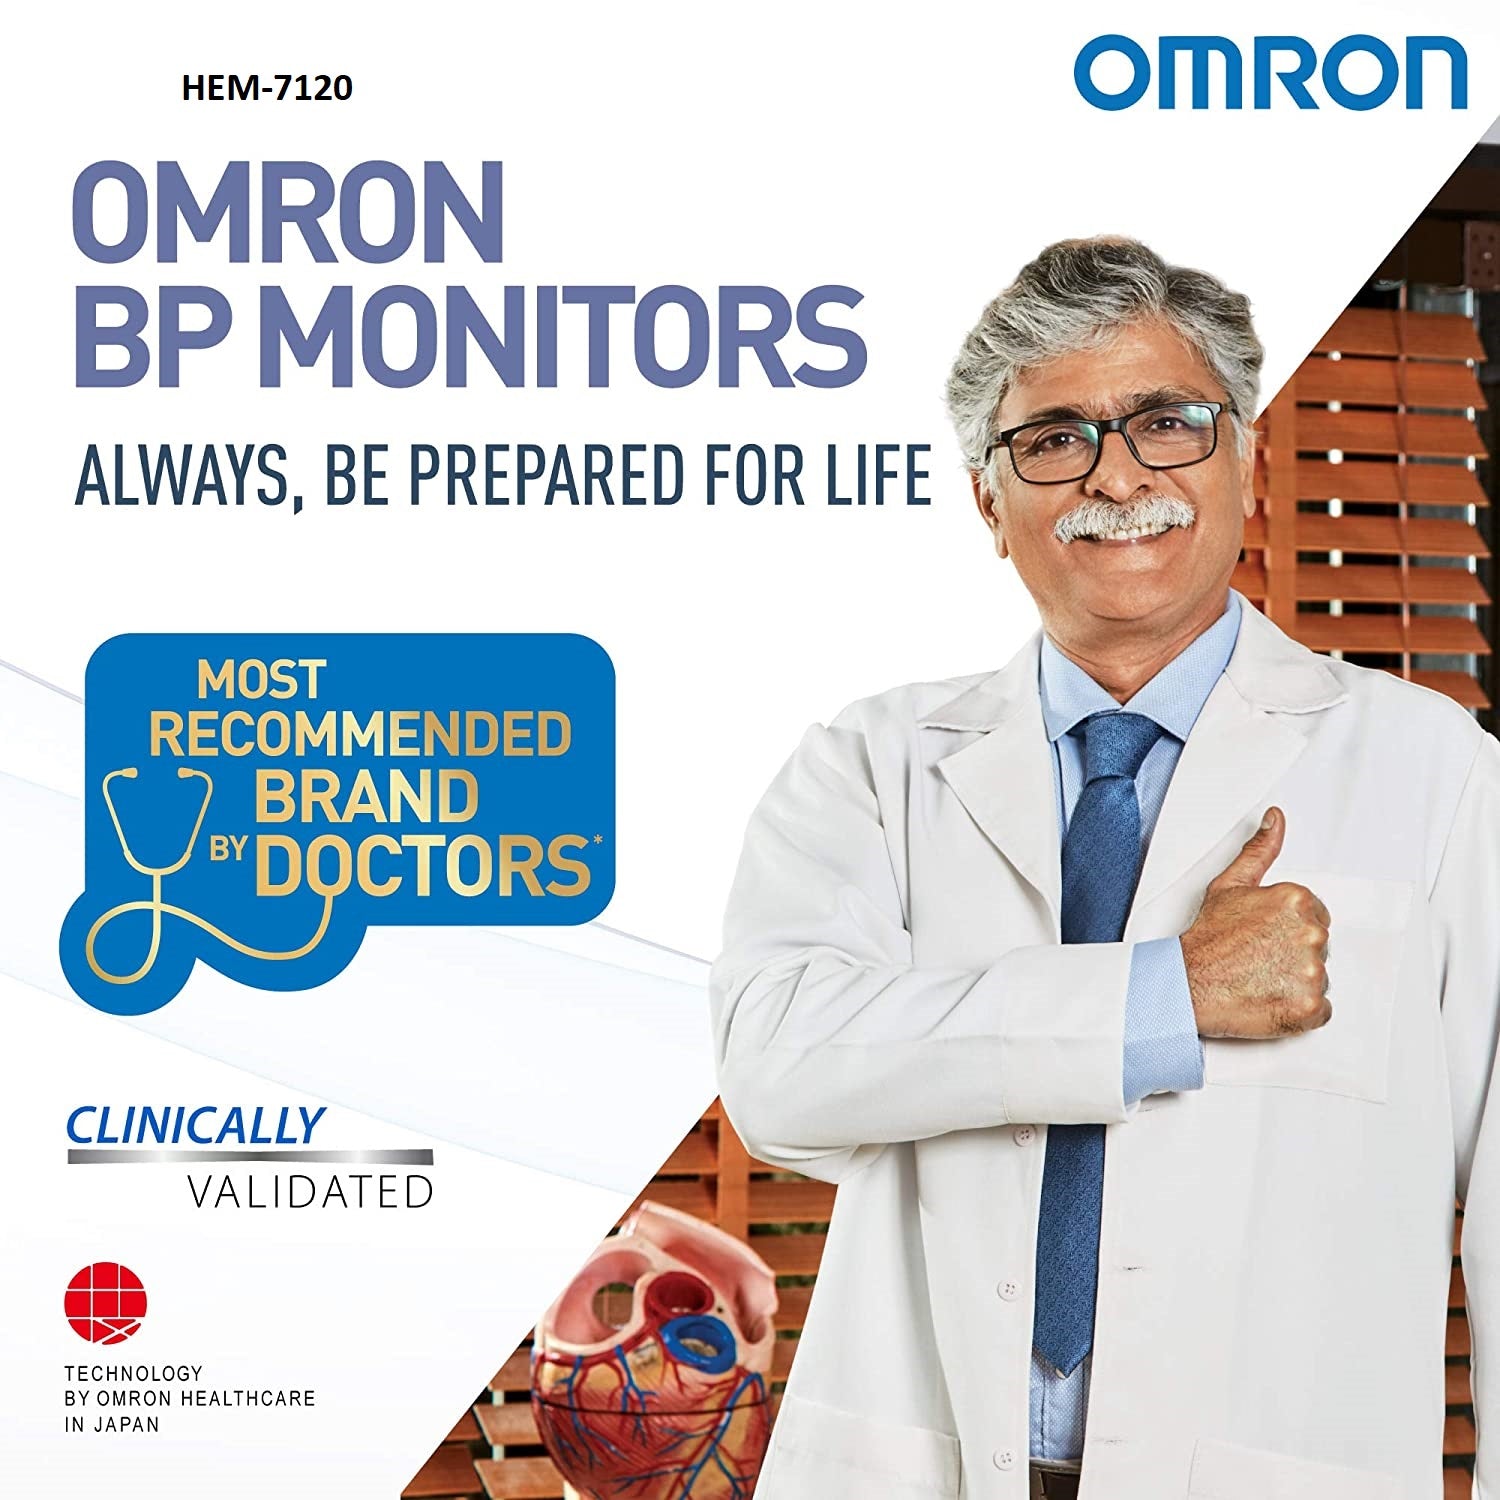 Omron Automatic Digital BP Monitor HEM-7120  With with Body Movement Detection & Irregular Heartbeat detection